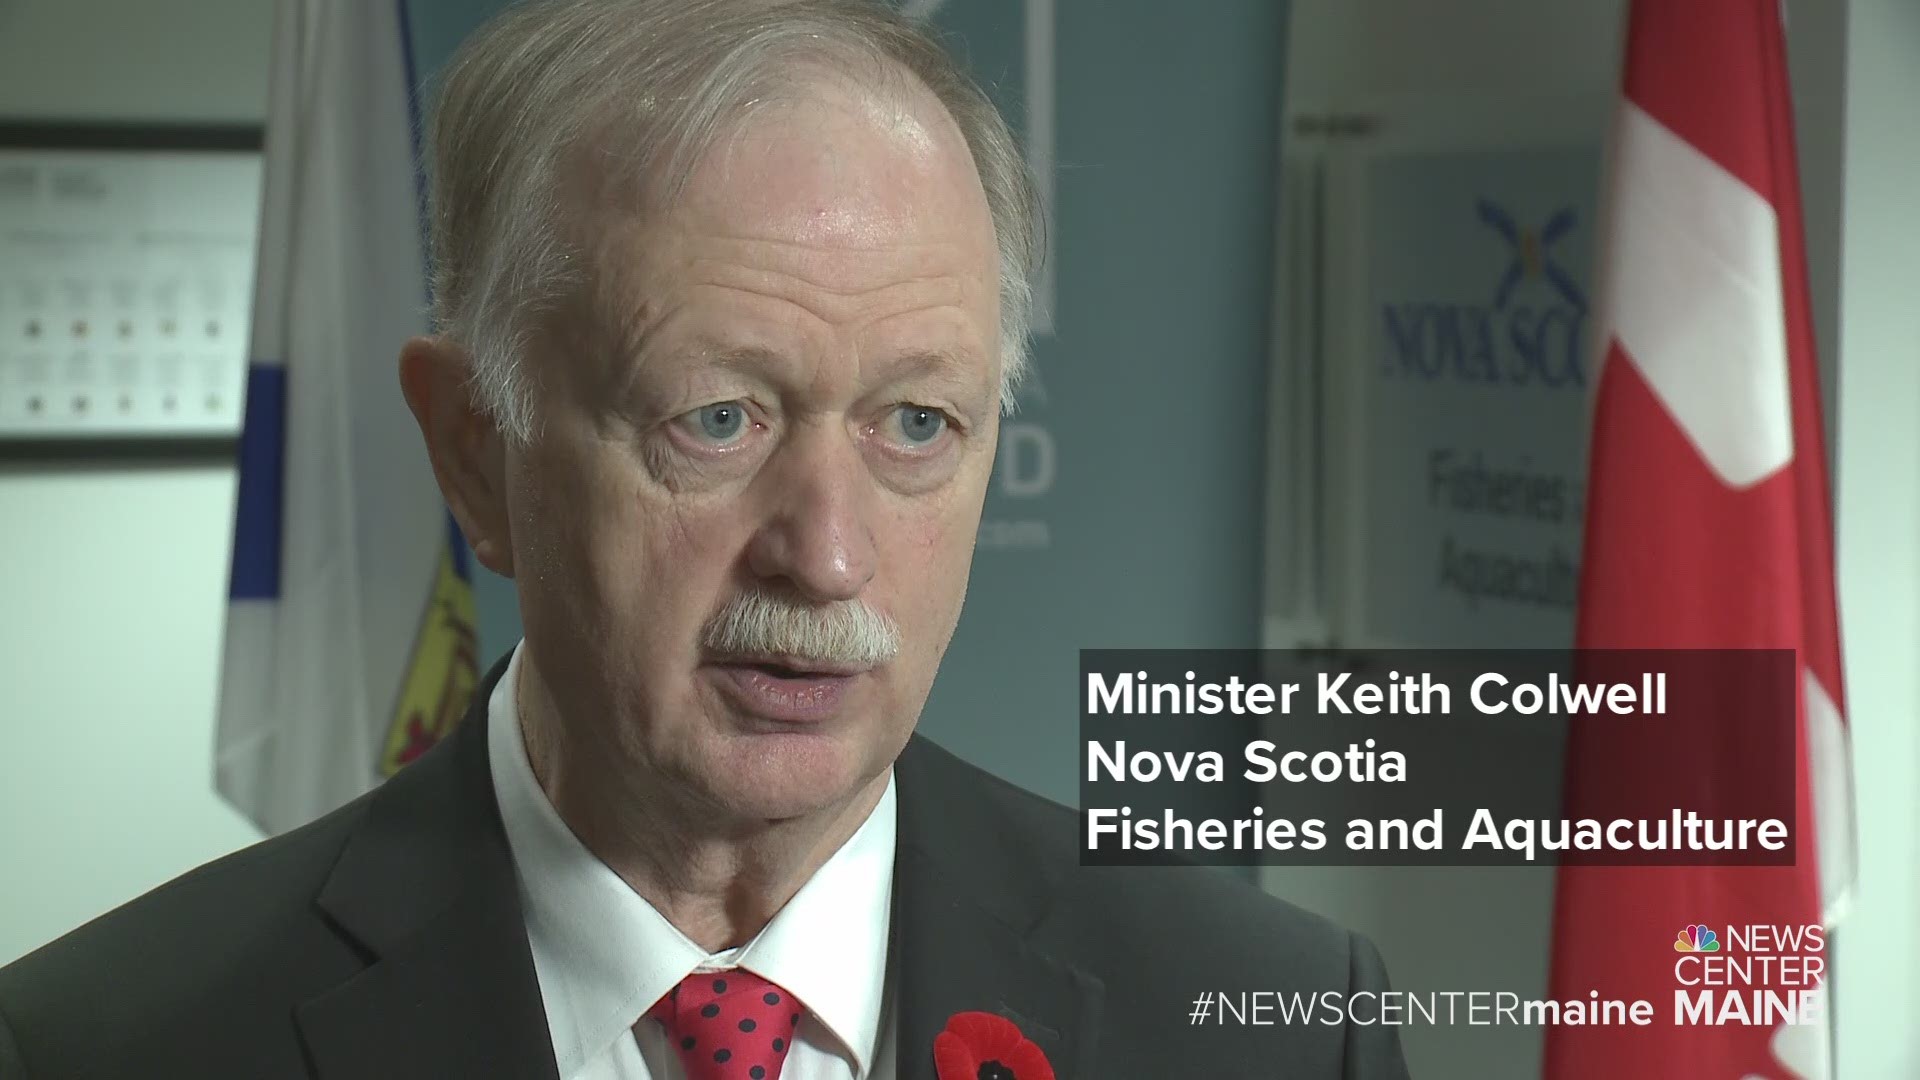 Minister Keith Colwell, Nova Scotia Ministry of Fisheries and Aquaculture talks about how Canada has tackled the increased lobster business